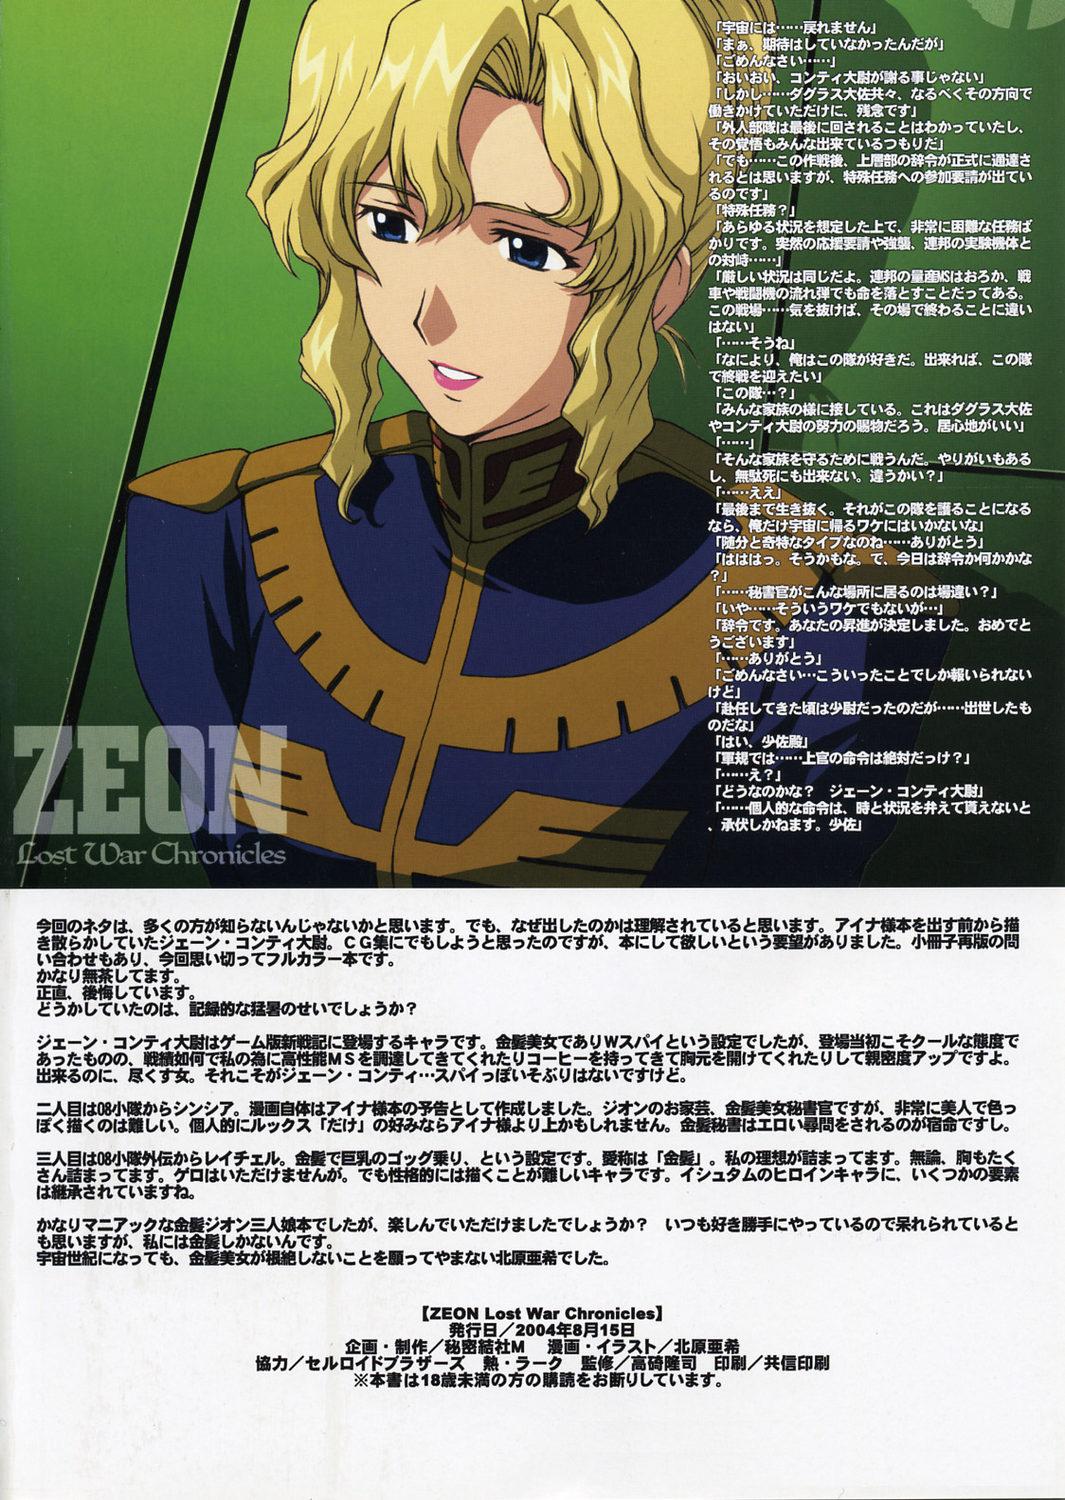 Body Massage ZEON Lost War Chronicles - Mobile suit gundam lost war chronicles Verification - Page 33